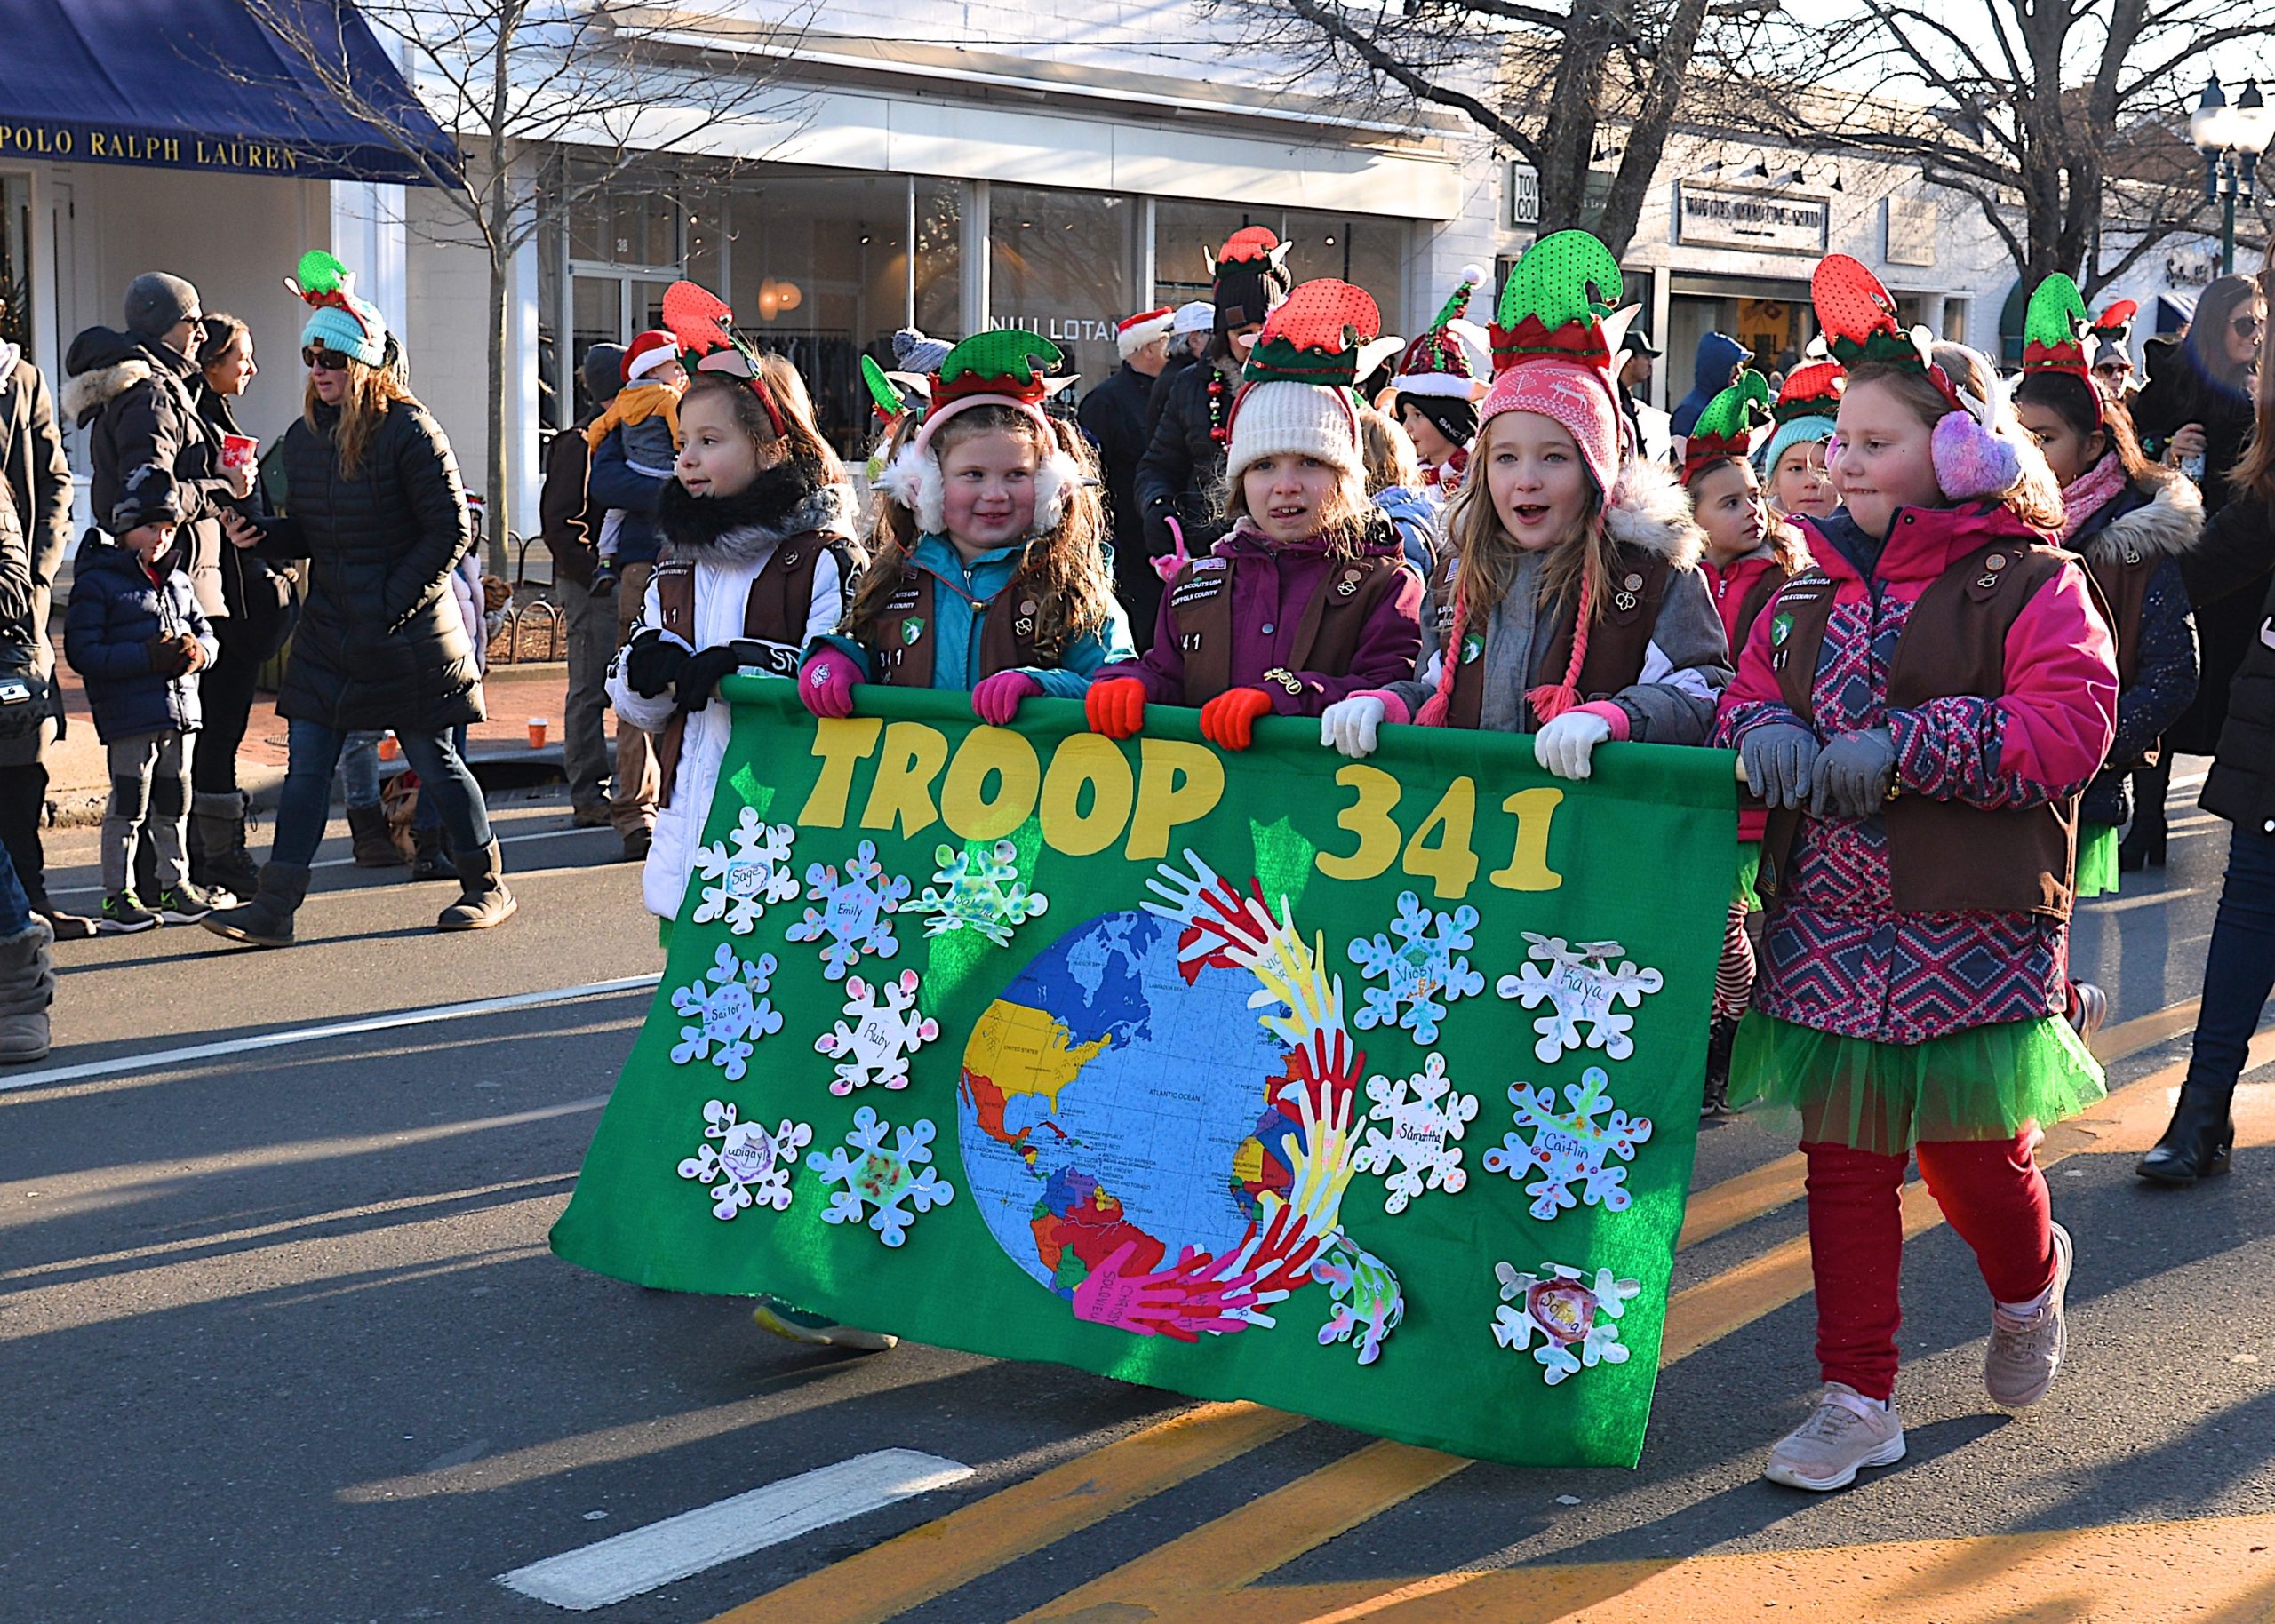 The holiday spirit was on full display Saturday afternoon as the annual Santa parade made its way through East Hampton's Main Street. KYRIL BROMLEY